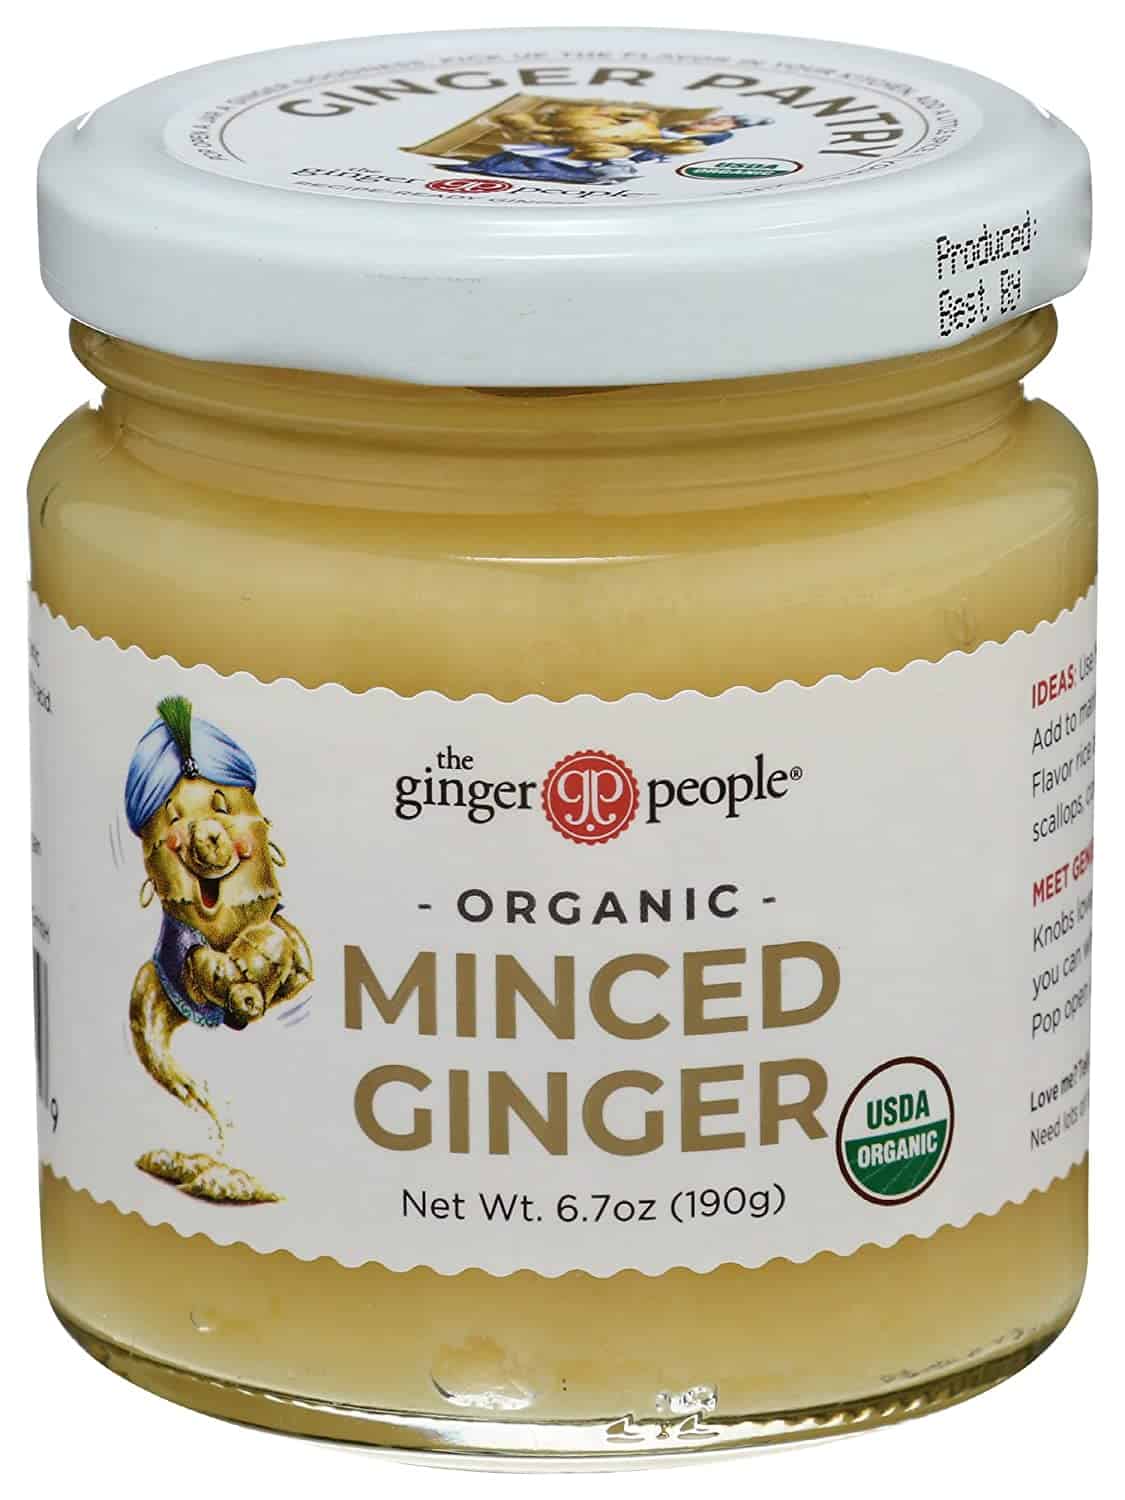 Organic ginger people minced ginger